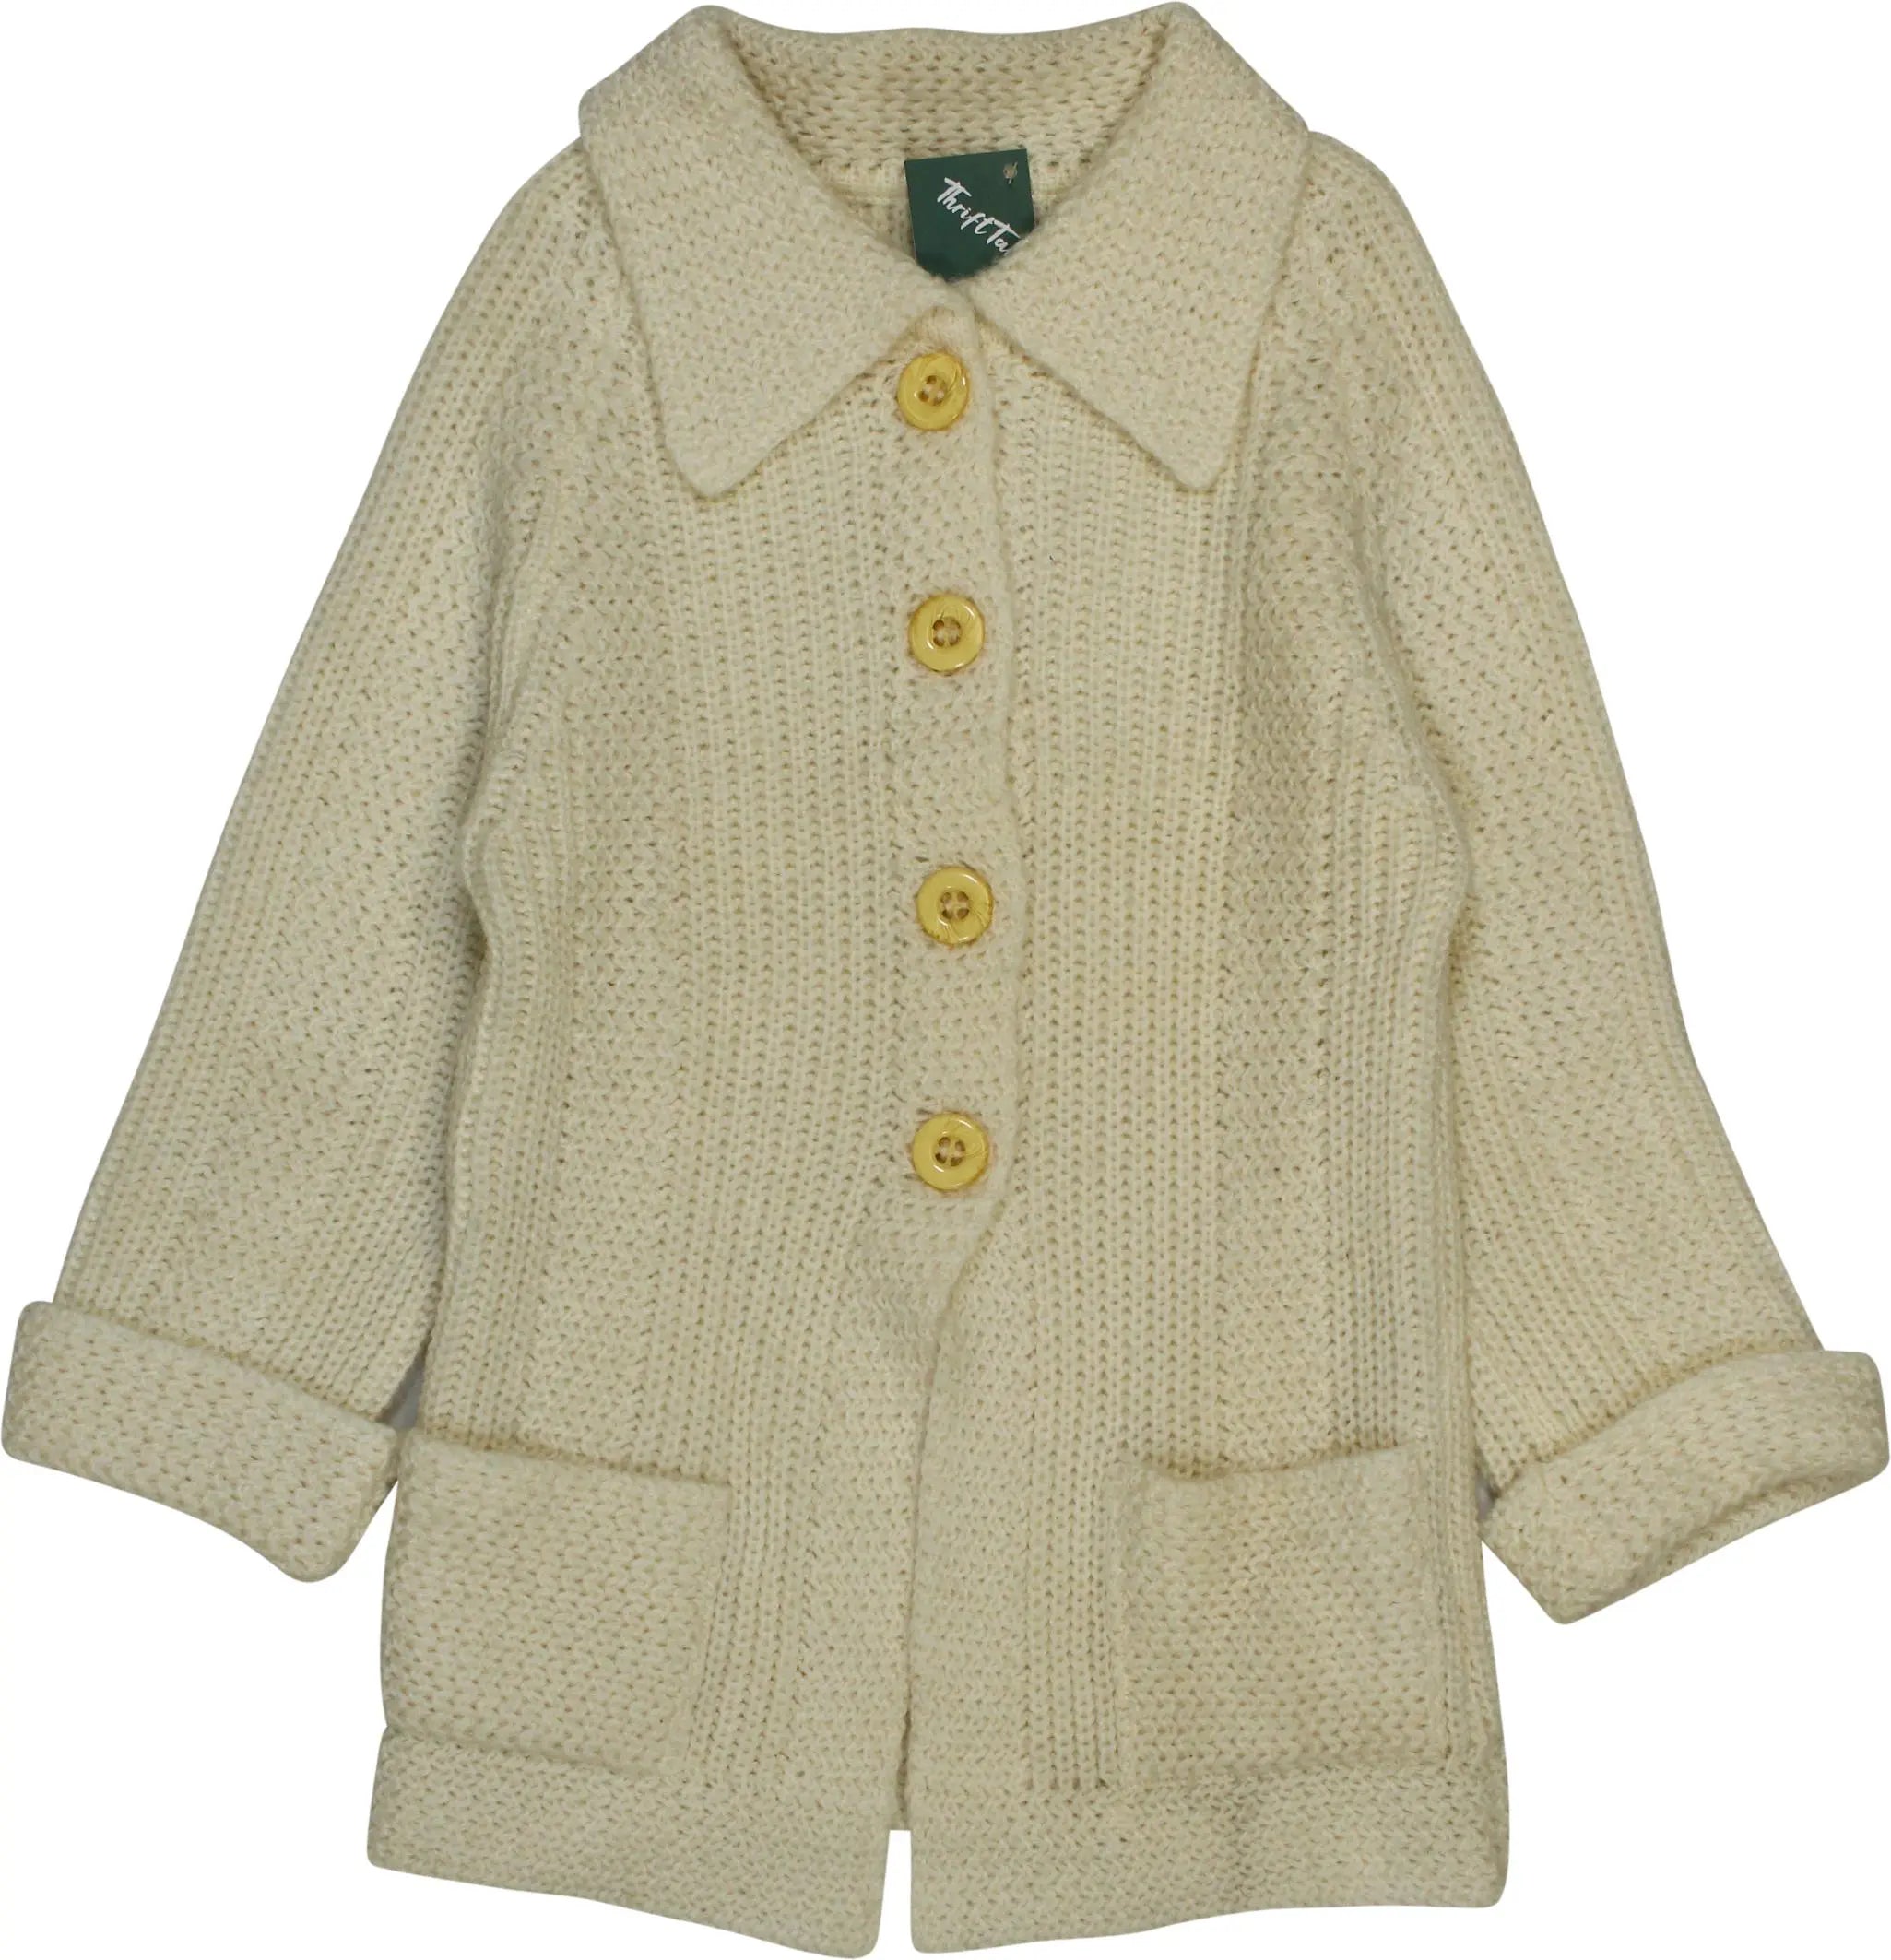 Handmade - Handmade Cream Knitted Cardigan- ThriftTale.com - Vintage and second handclothing